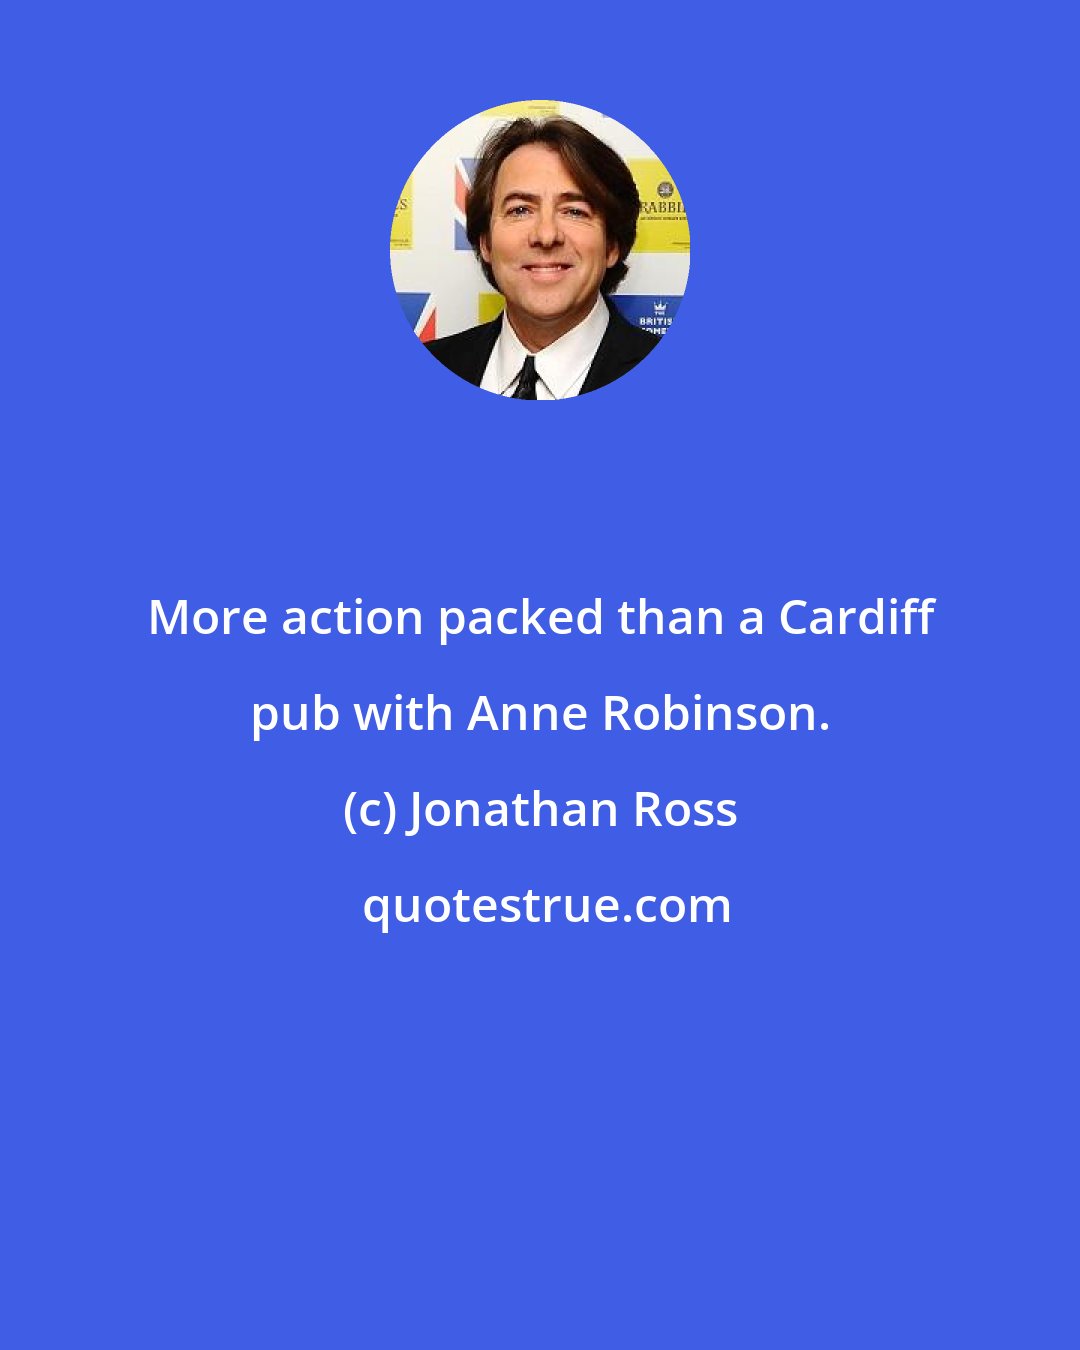 Jonathan Ross: More action packed than a Cardiff pub with Anne Robinson.